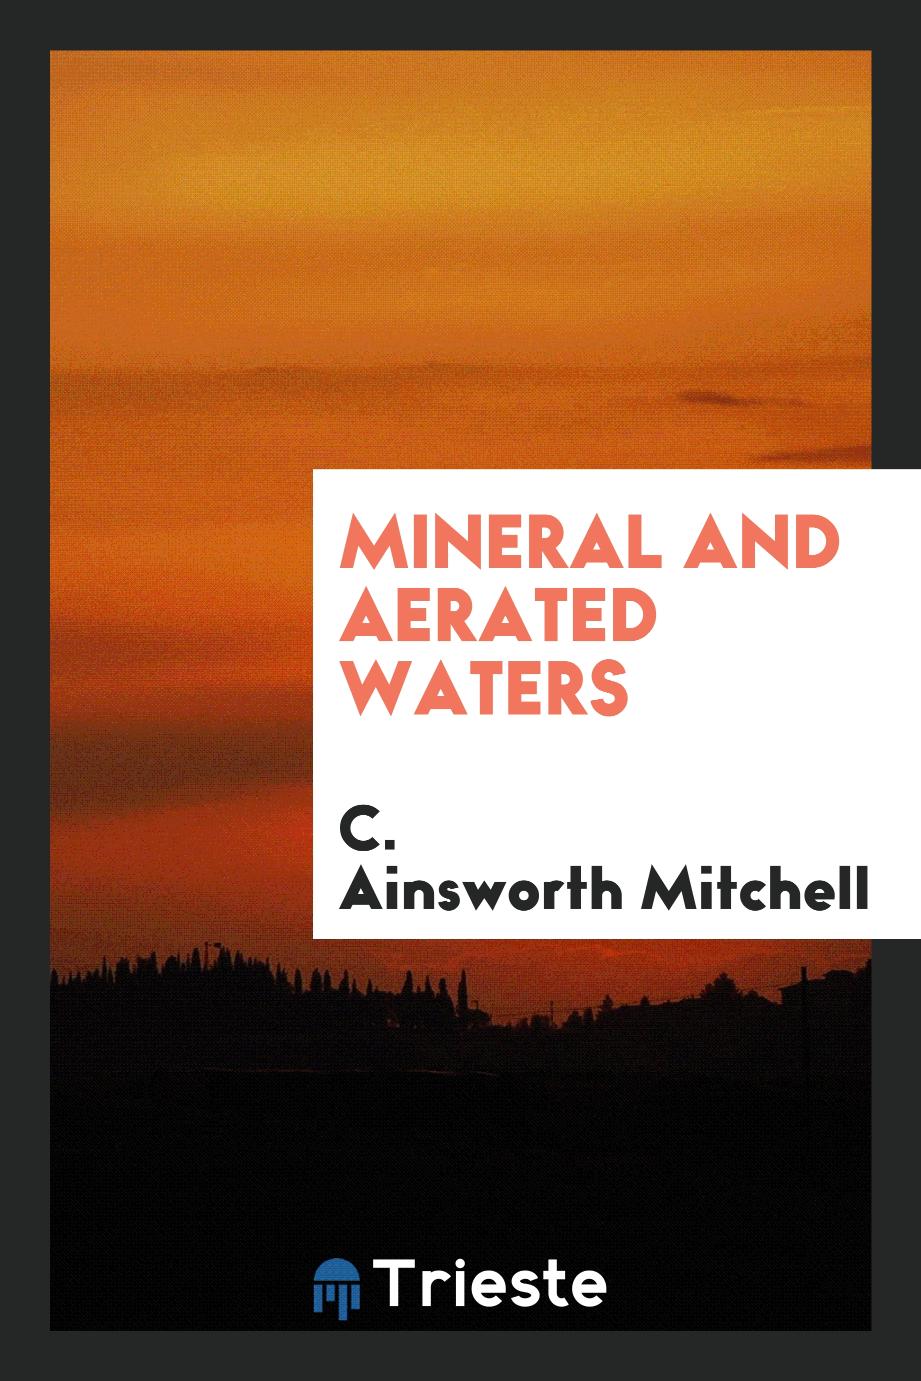 Mineral and aerated waters